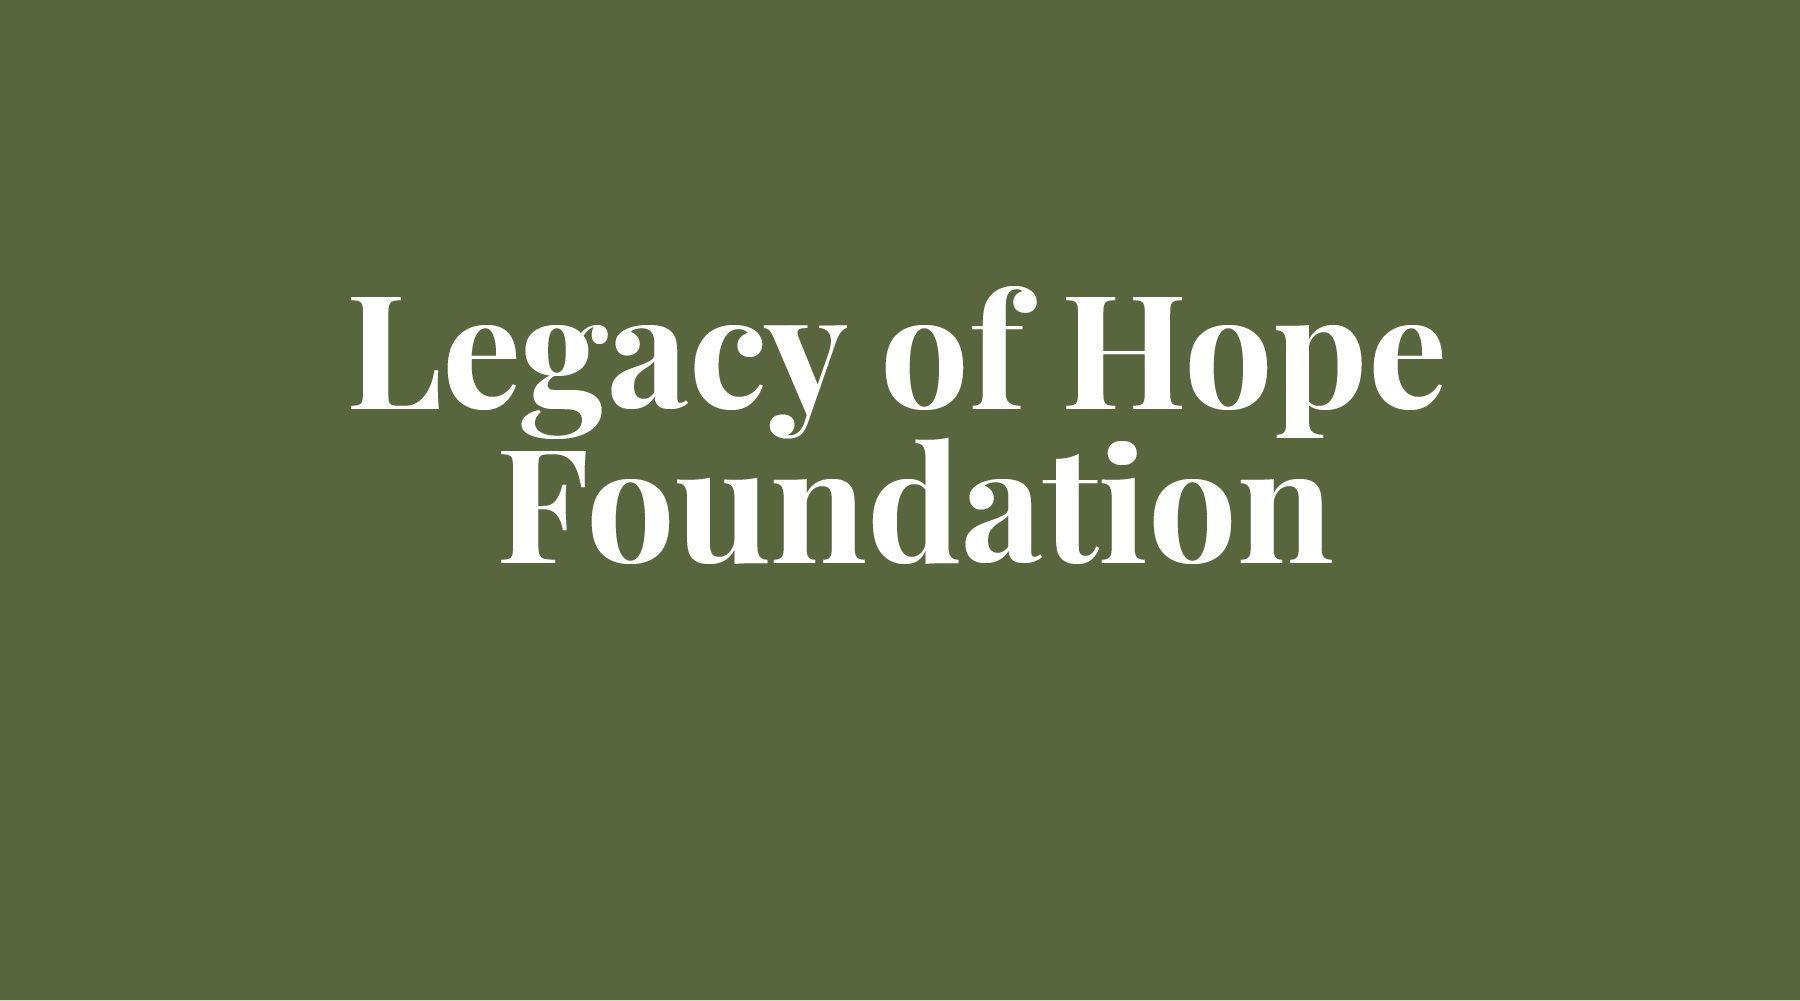 OUR JUNE NON-PROFIT - LEGACY OF HOPE FOUNDATION